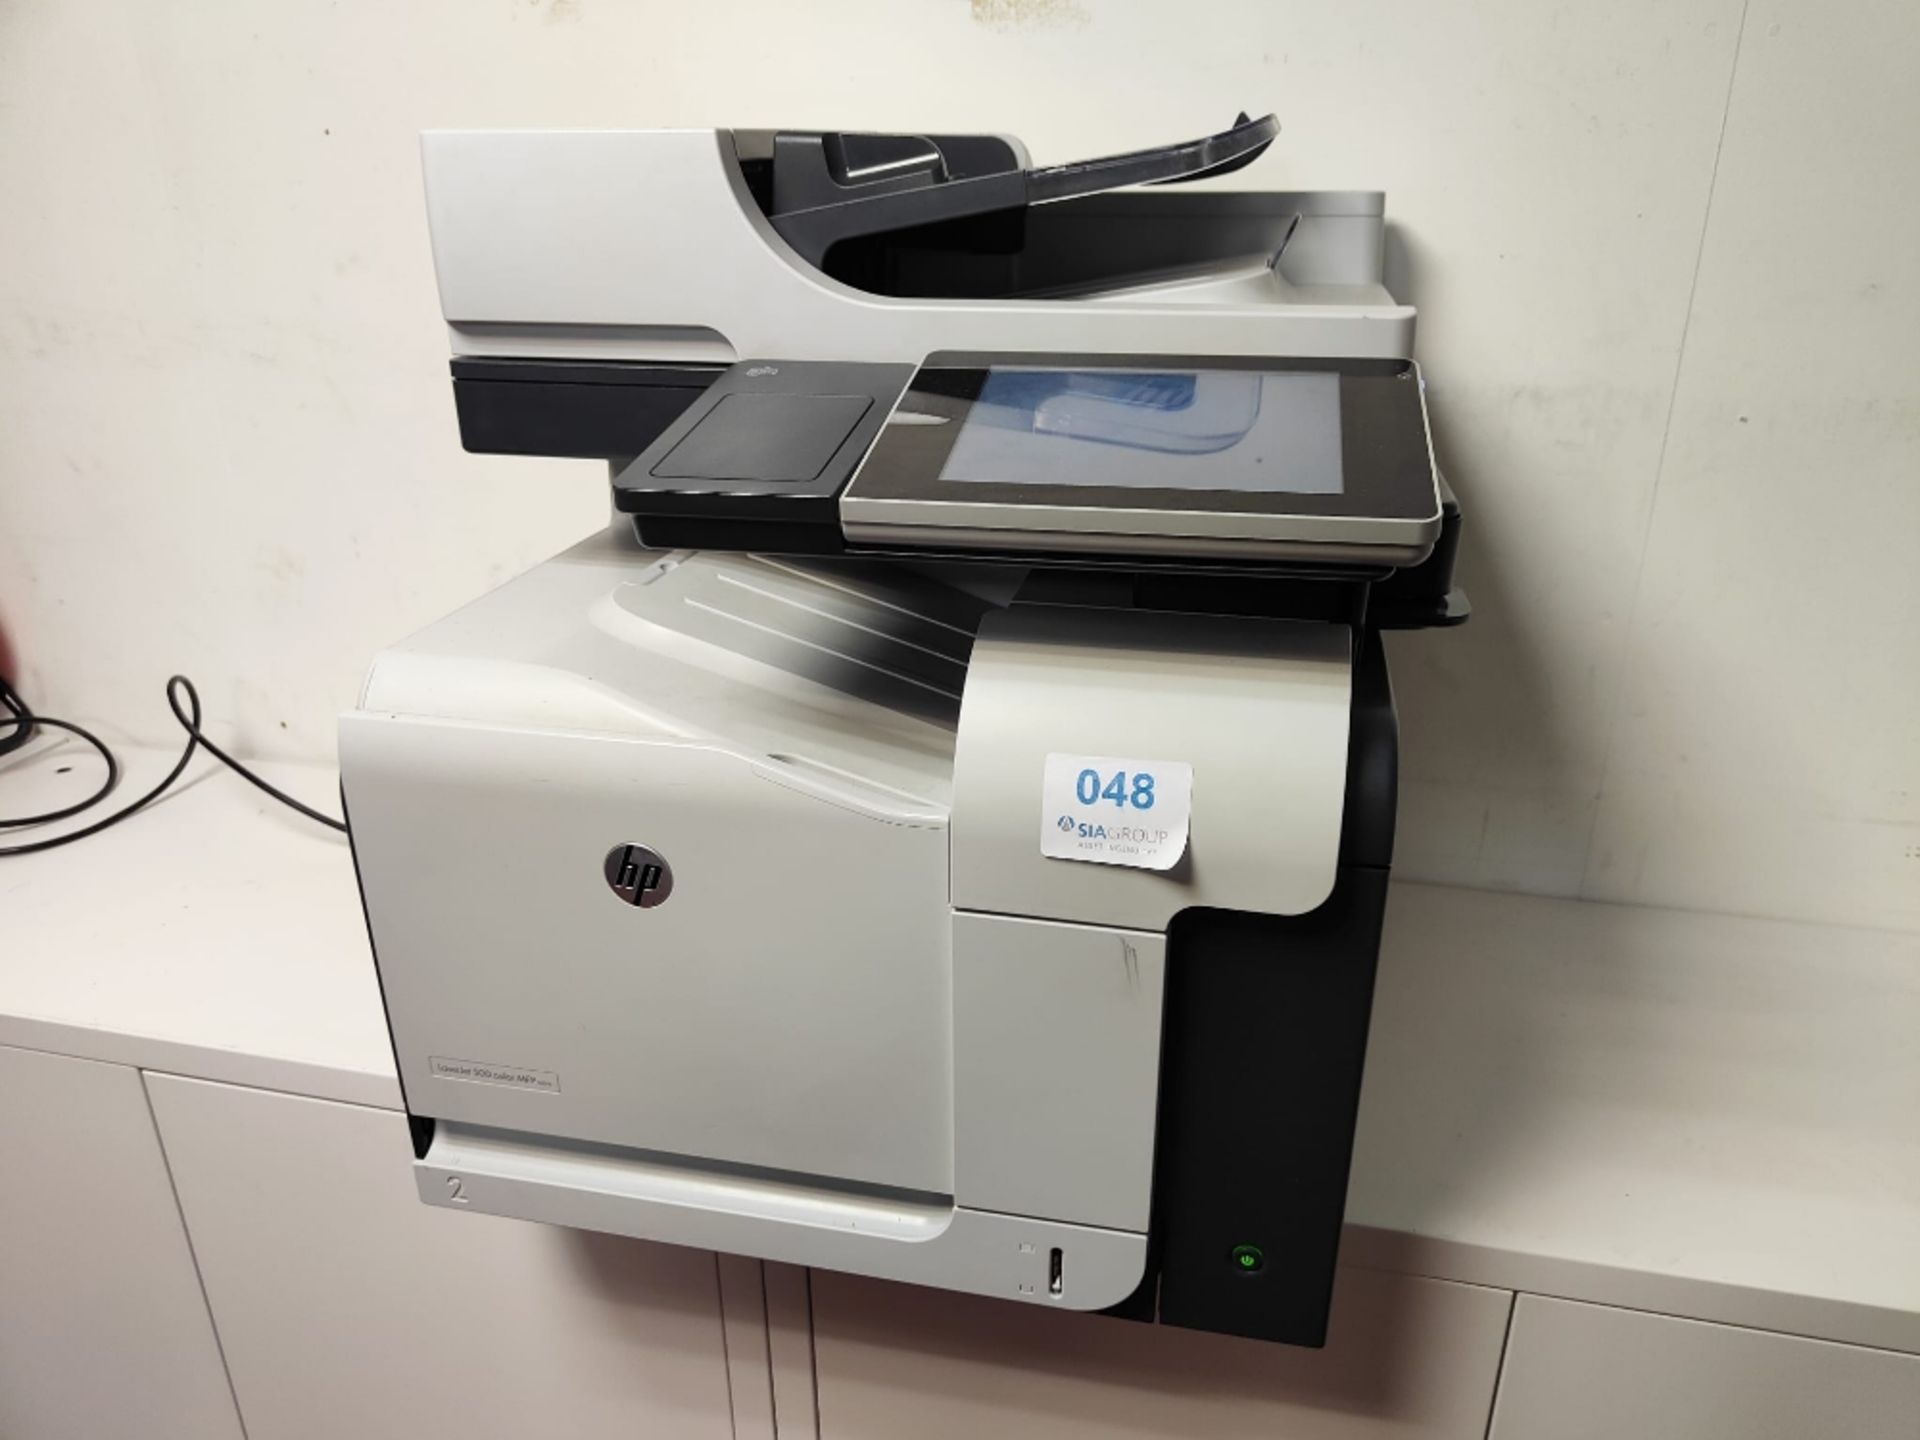 HP LaserJet 500 Color MFP M575 photocopier for spares and repairs